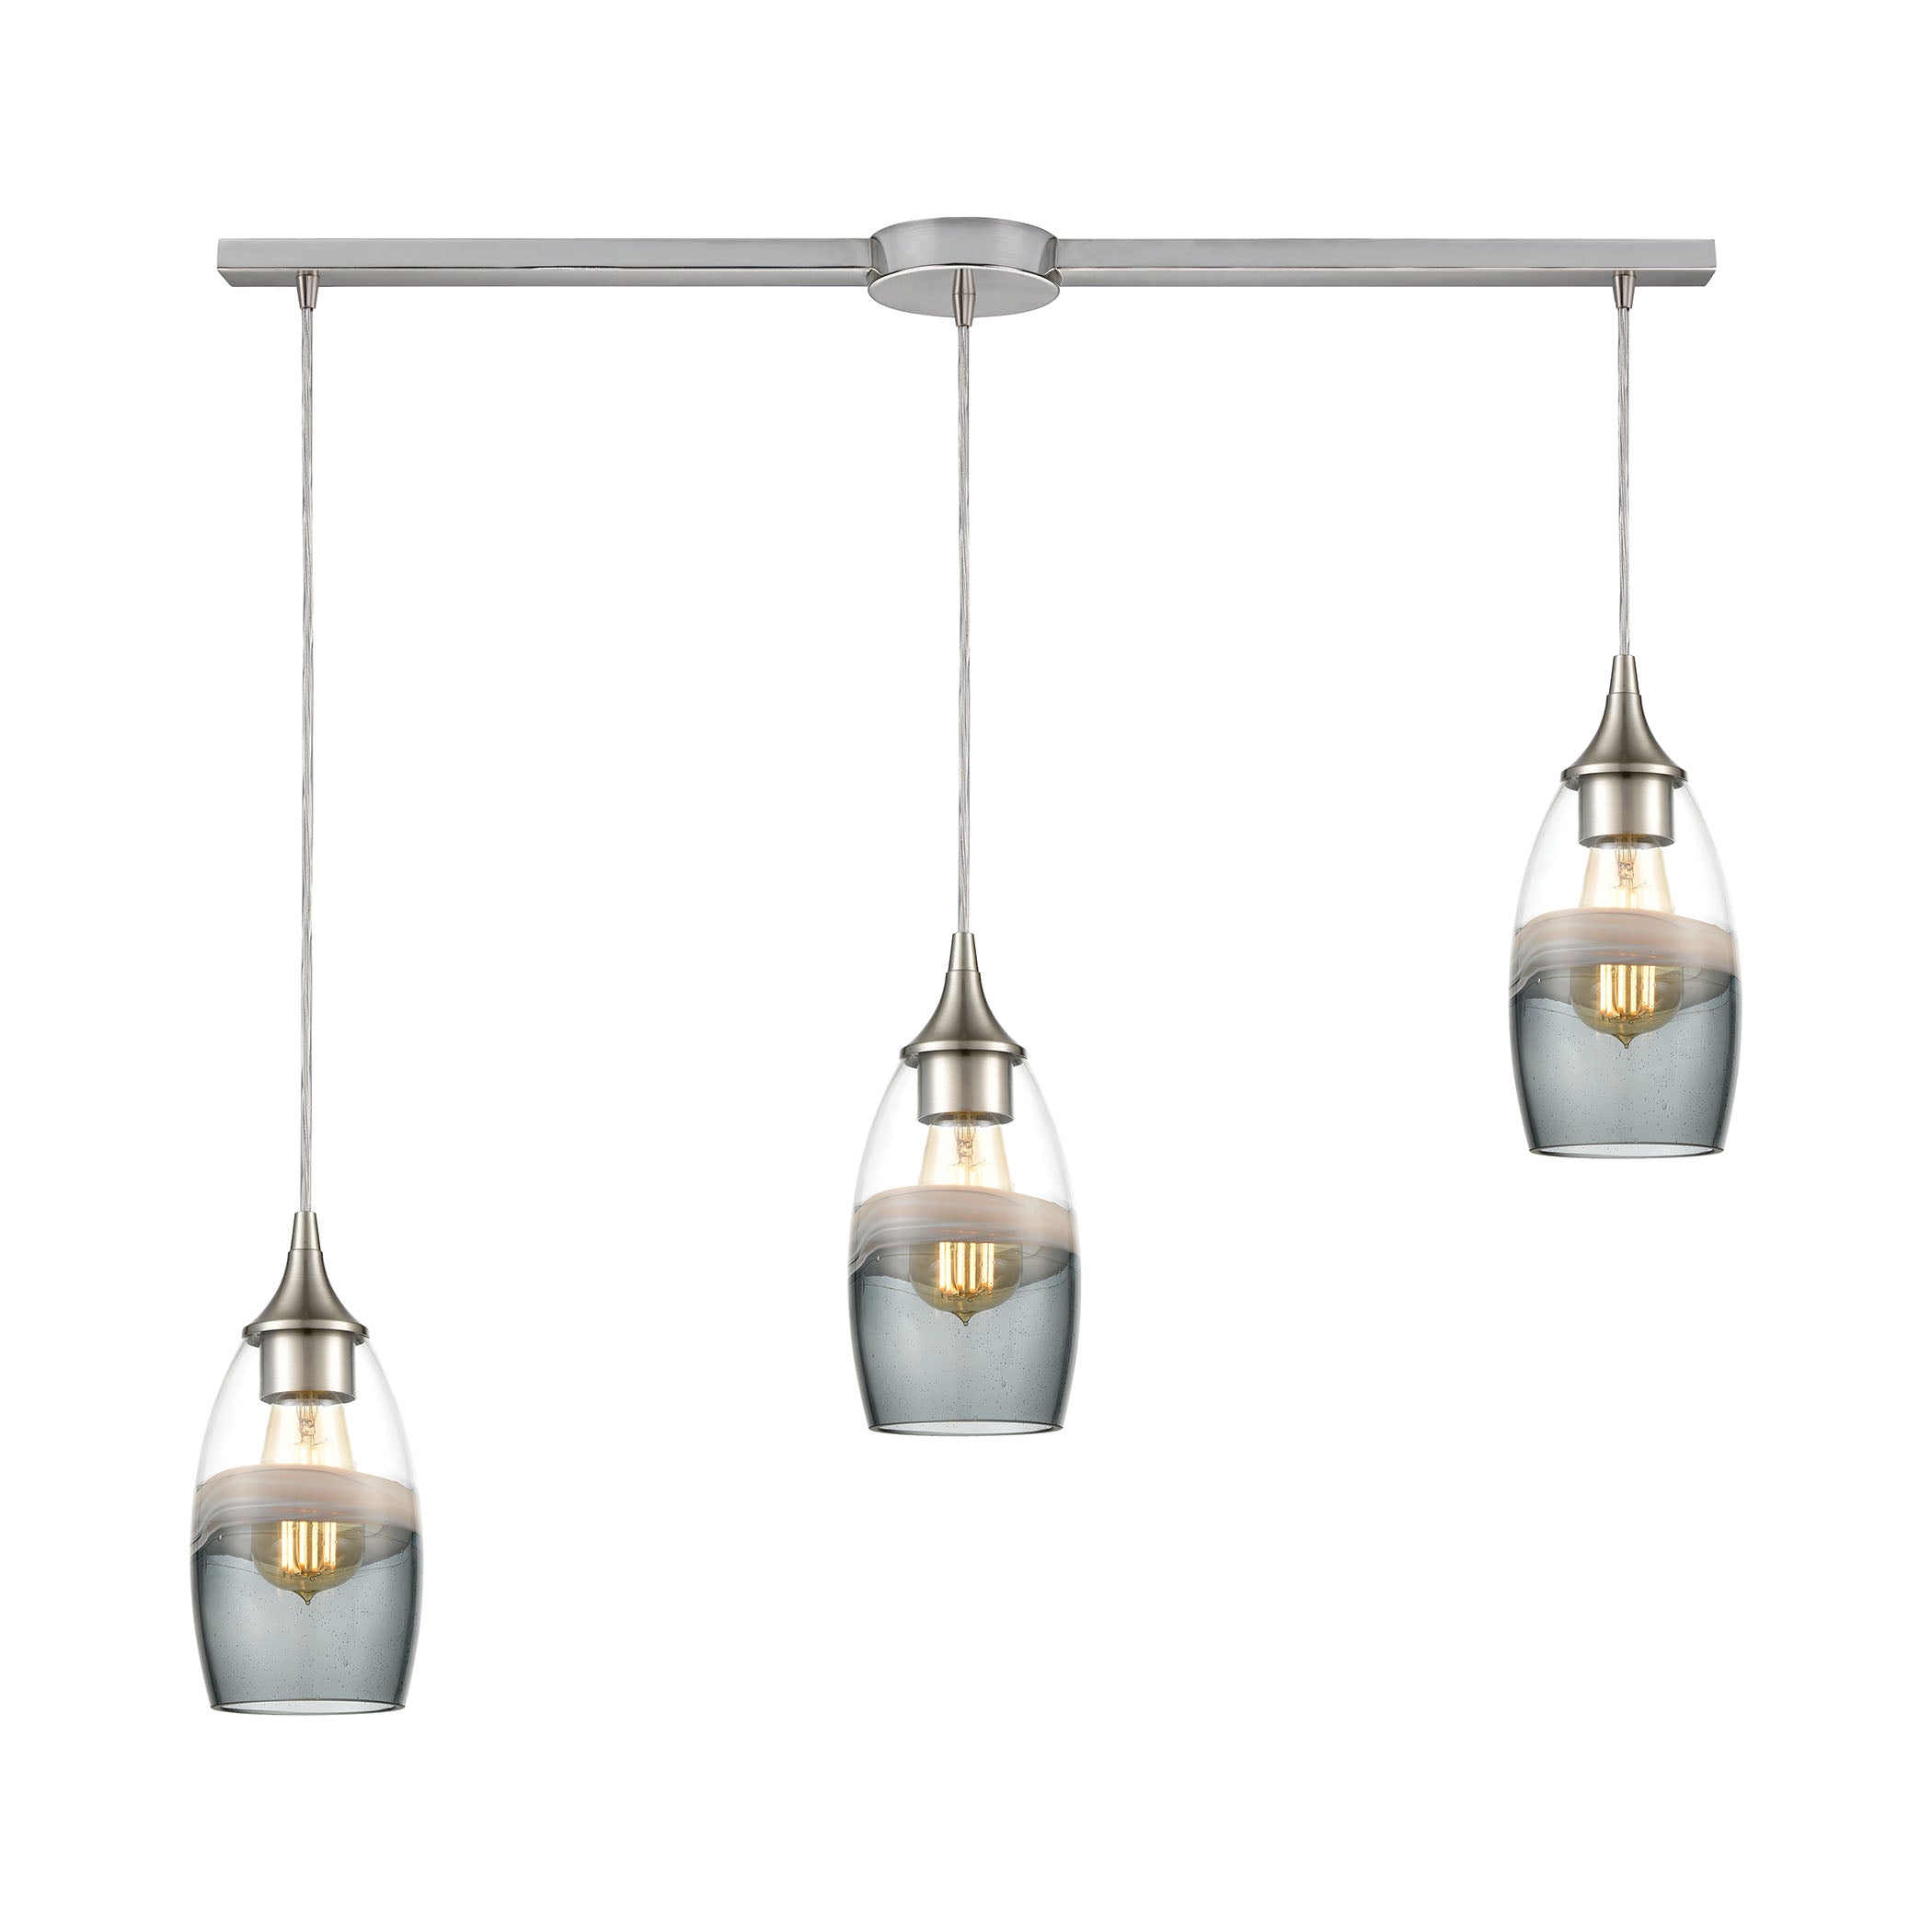 ELK Lighting 25098/3L Sutter Creek 3-Light Linear Mini Pendant Fixture with Clear, Grey, and Smoke Seedy Glass